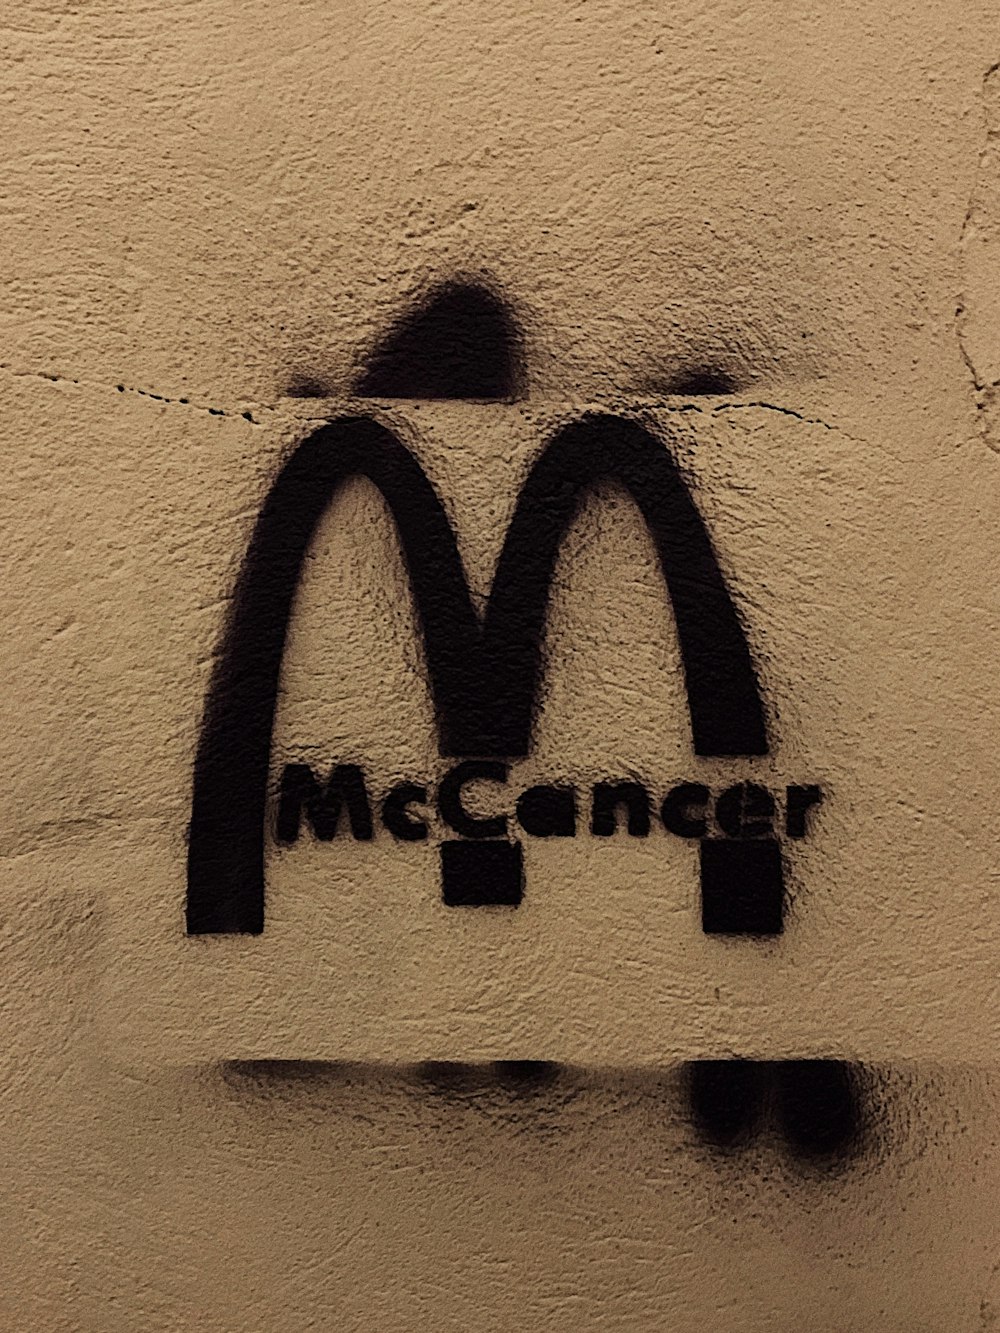 a picture of a mcdonald's logo on a wall